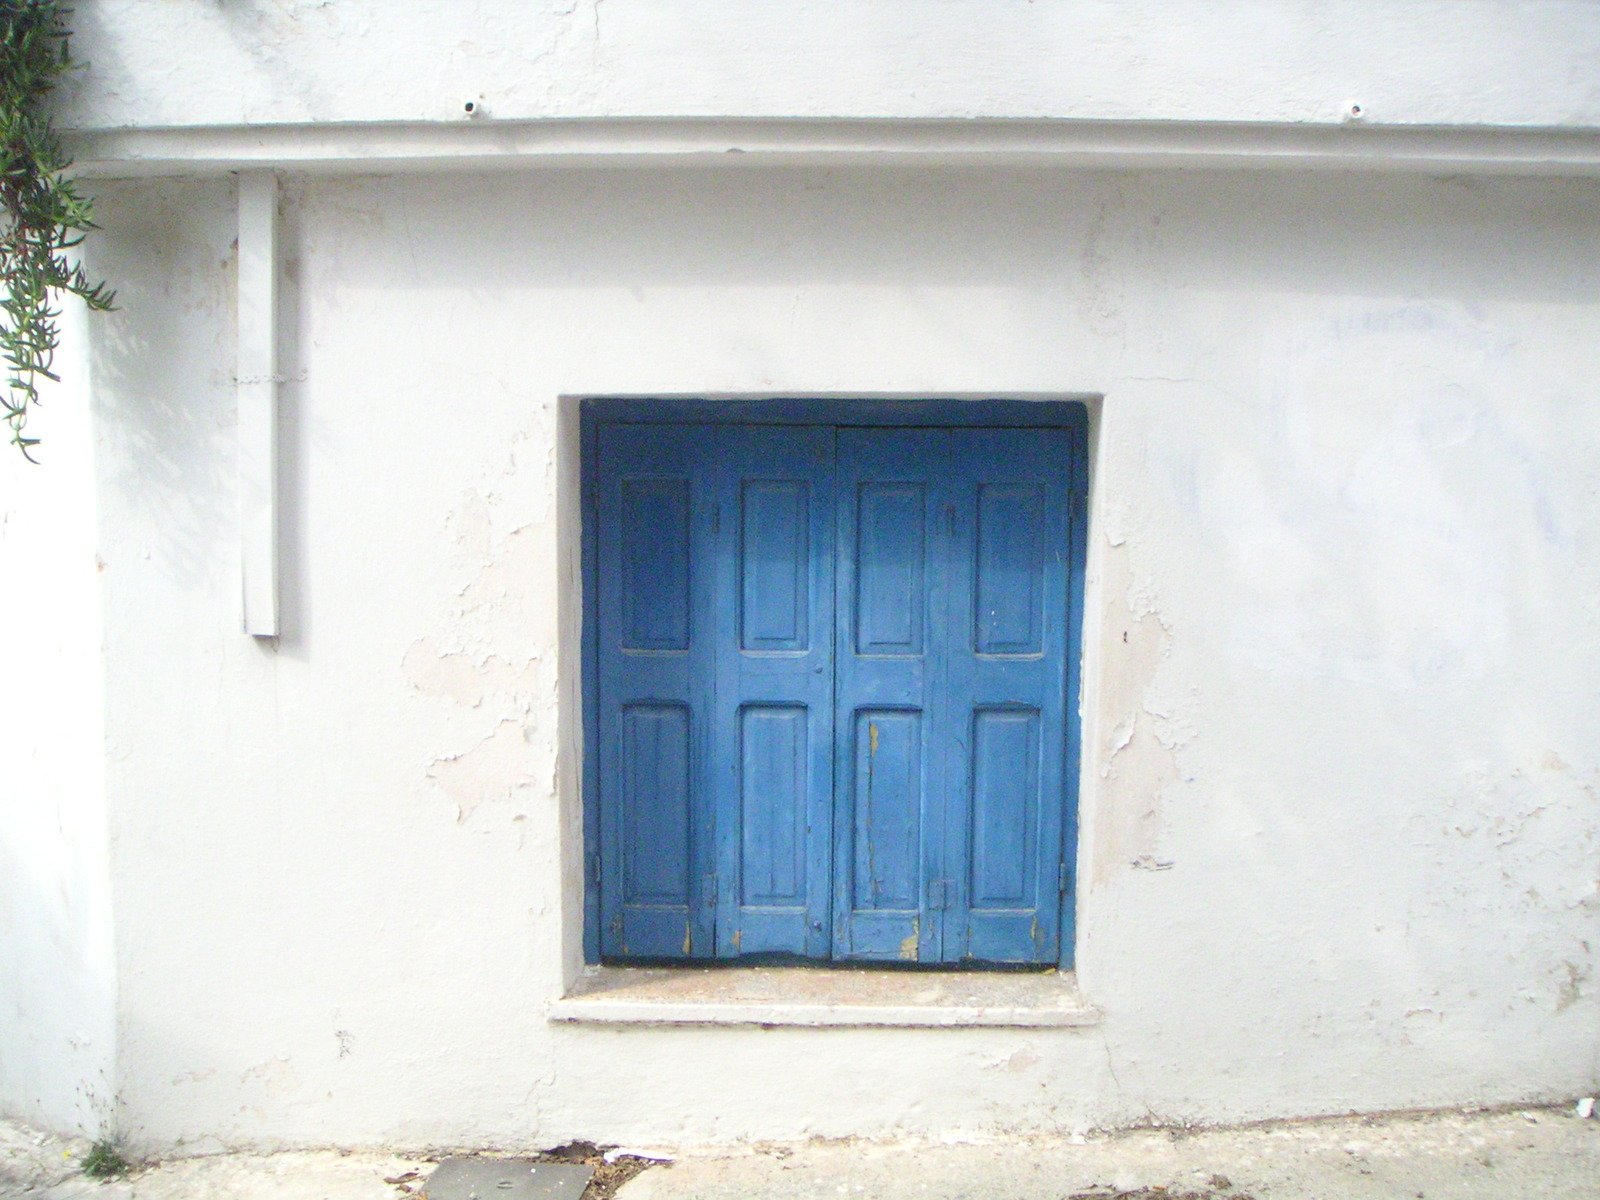 the blue door of an old building has a narrow window